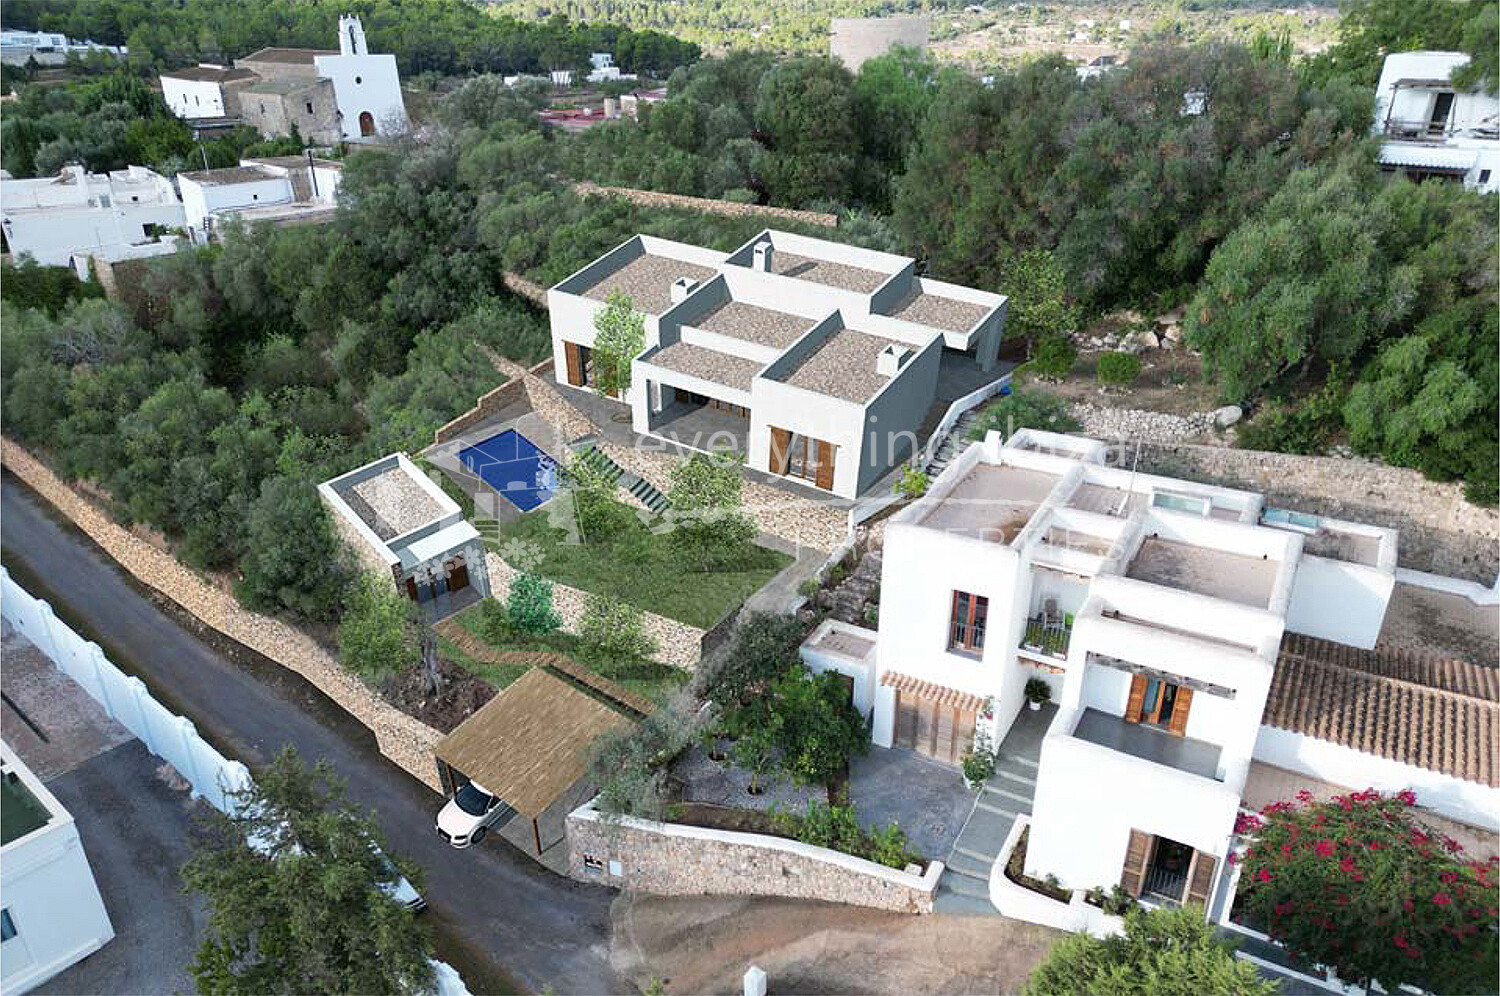 Attractive Plot of Land with Project/Plans for a 4 Bedroom Villa with Swimming Pool, ref. 1691, for sale in Ibiza by everything ibiza Properties